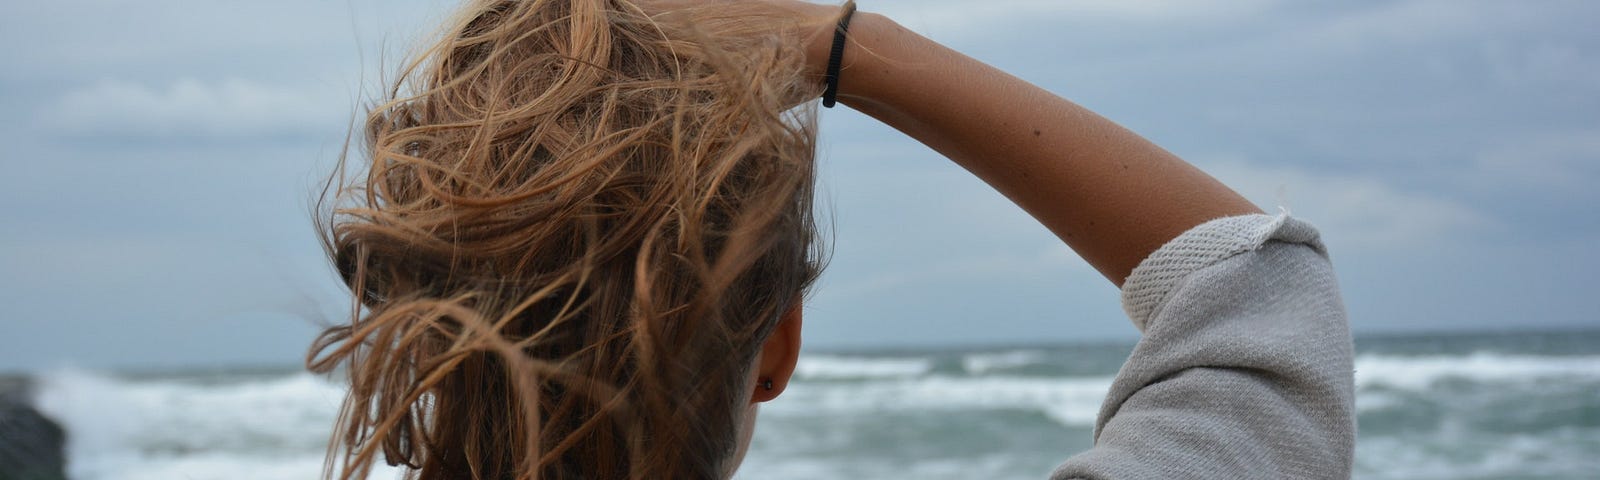 Back of woman with reddish-brown hair facing a cloud sky and turbulent ocean.